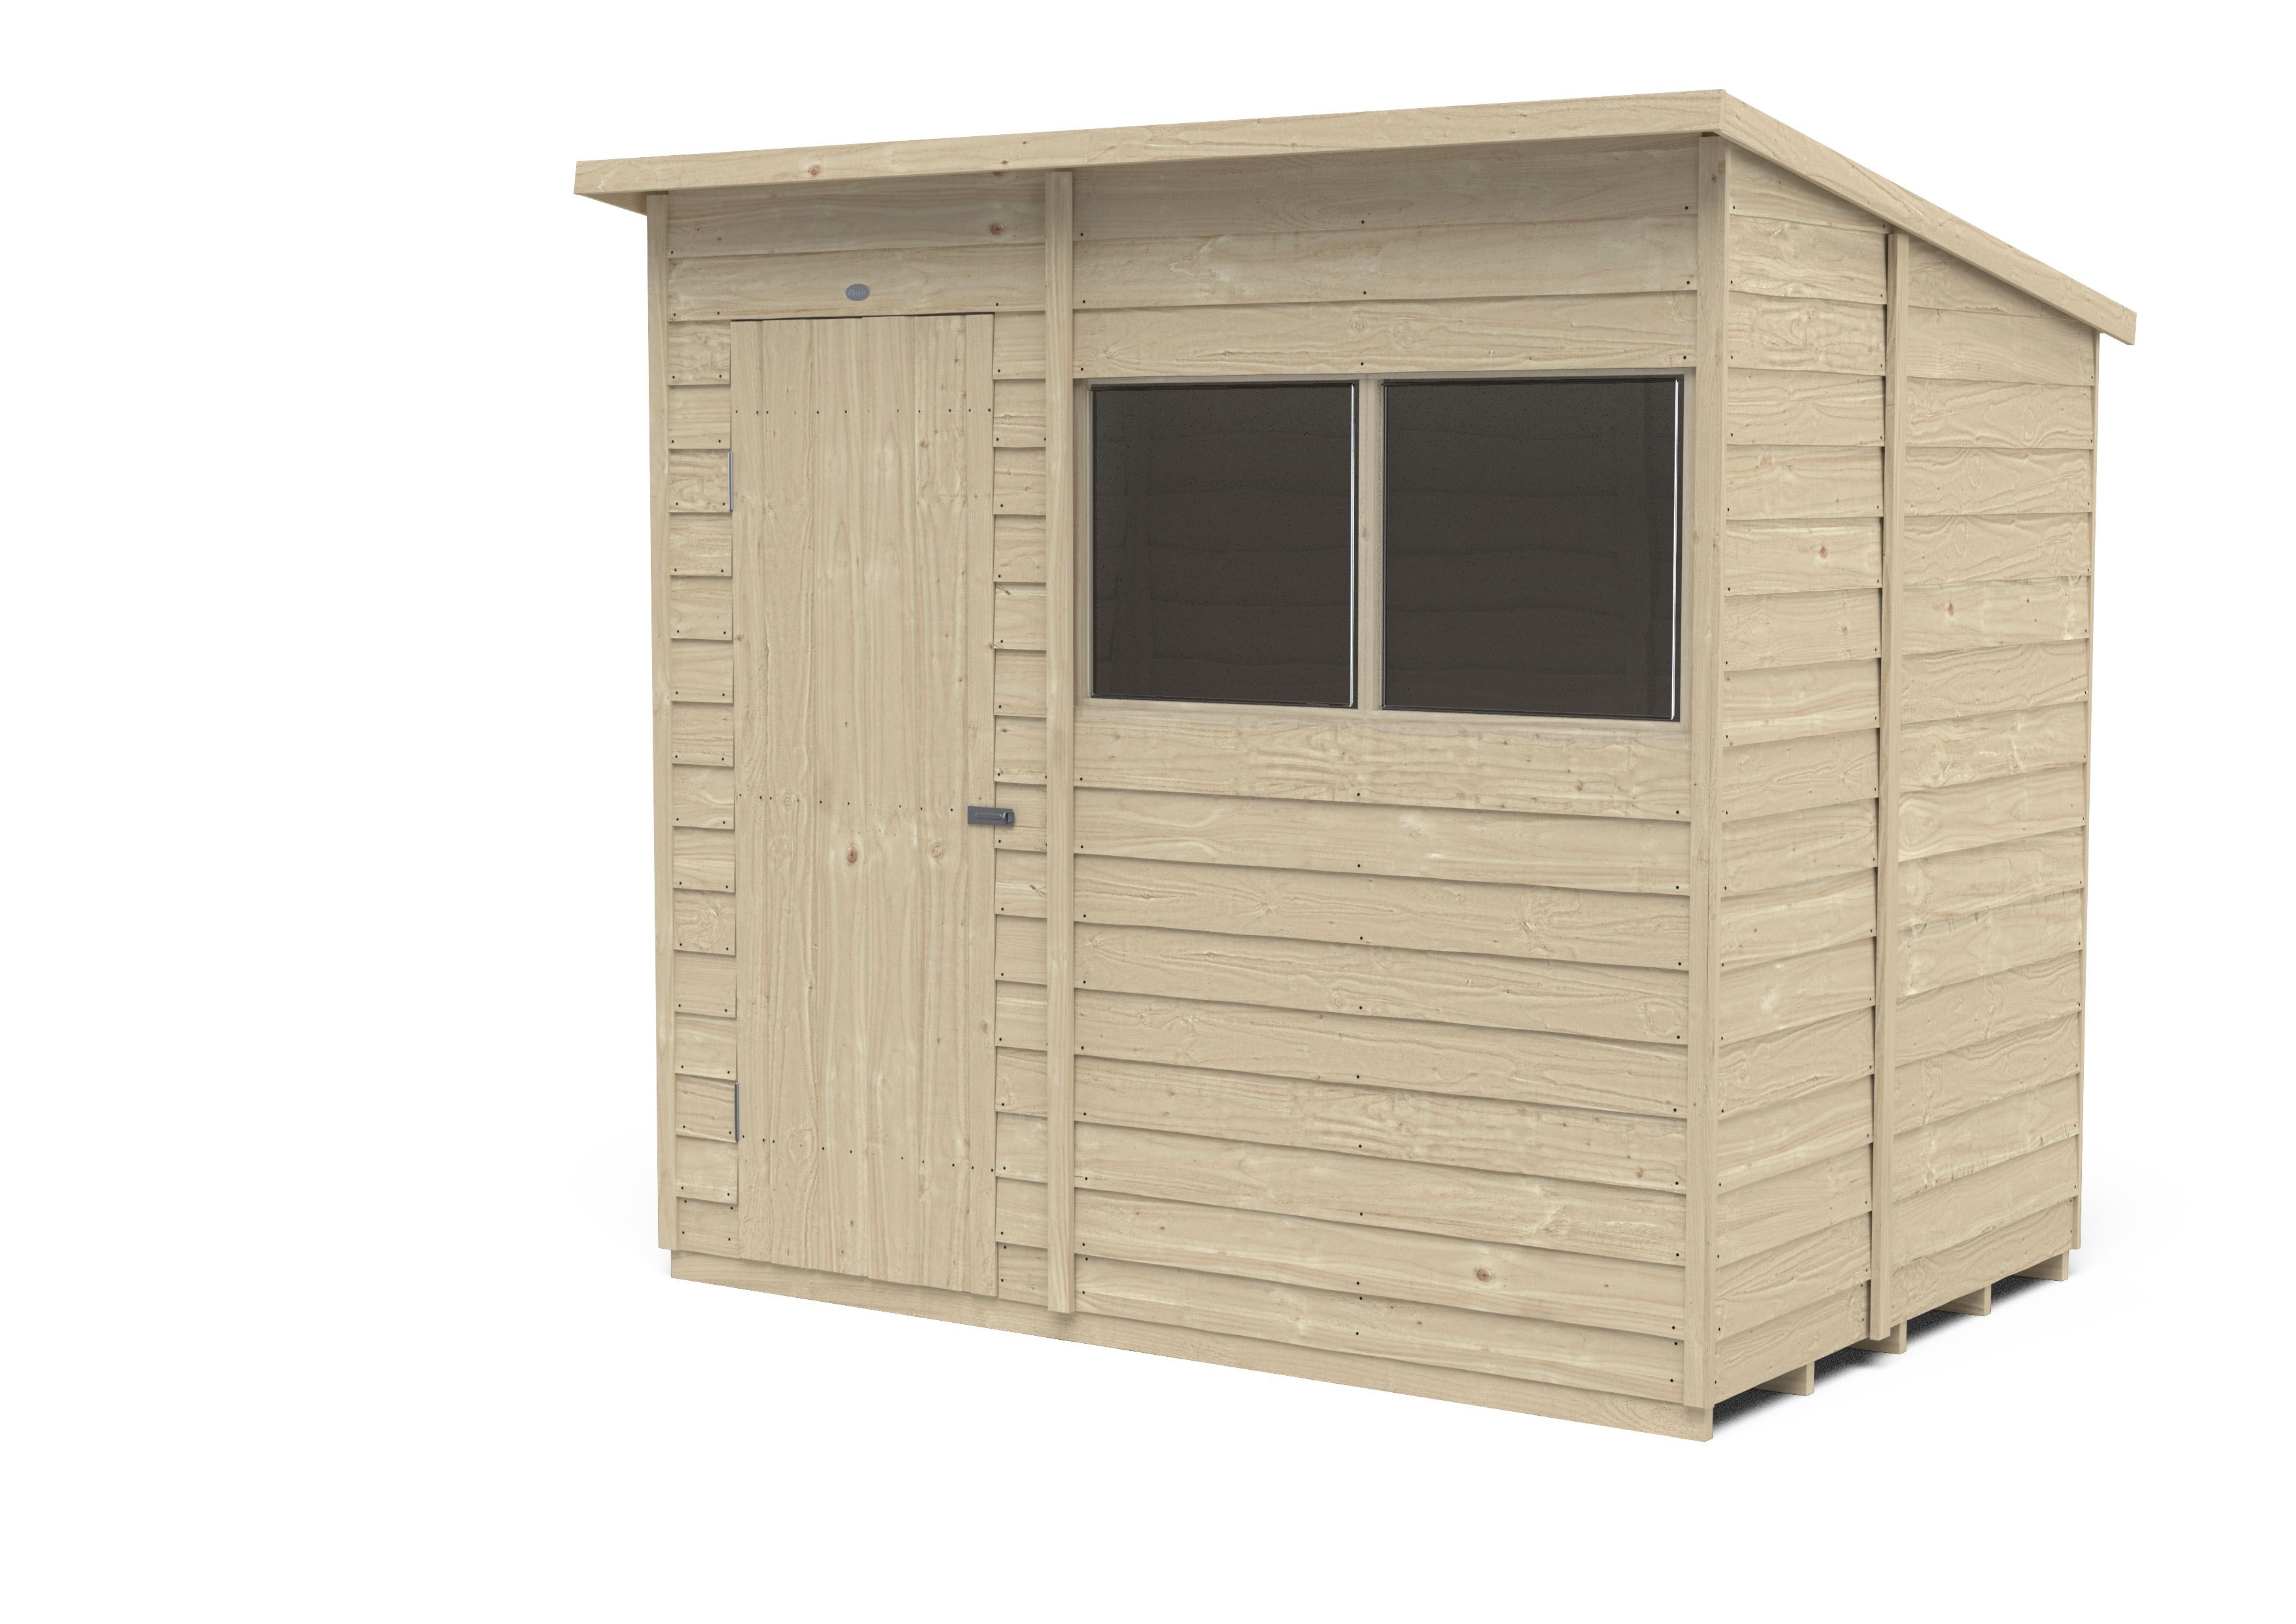 Forest Garden Overlap 7x5 ft Pent Wooden Pressure treated Shed with floor & 2 windows